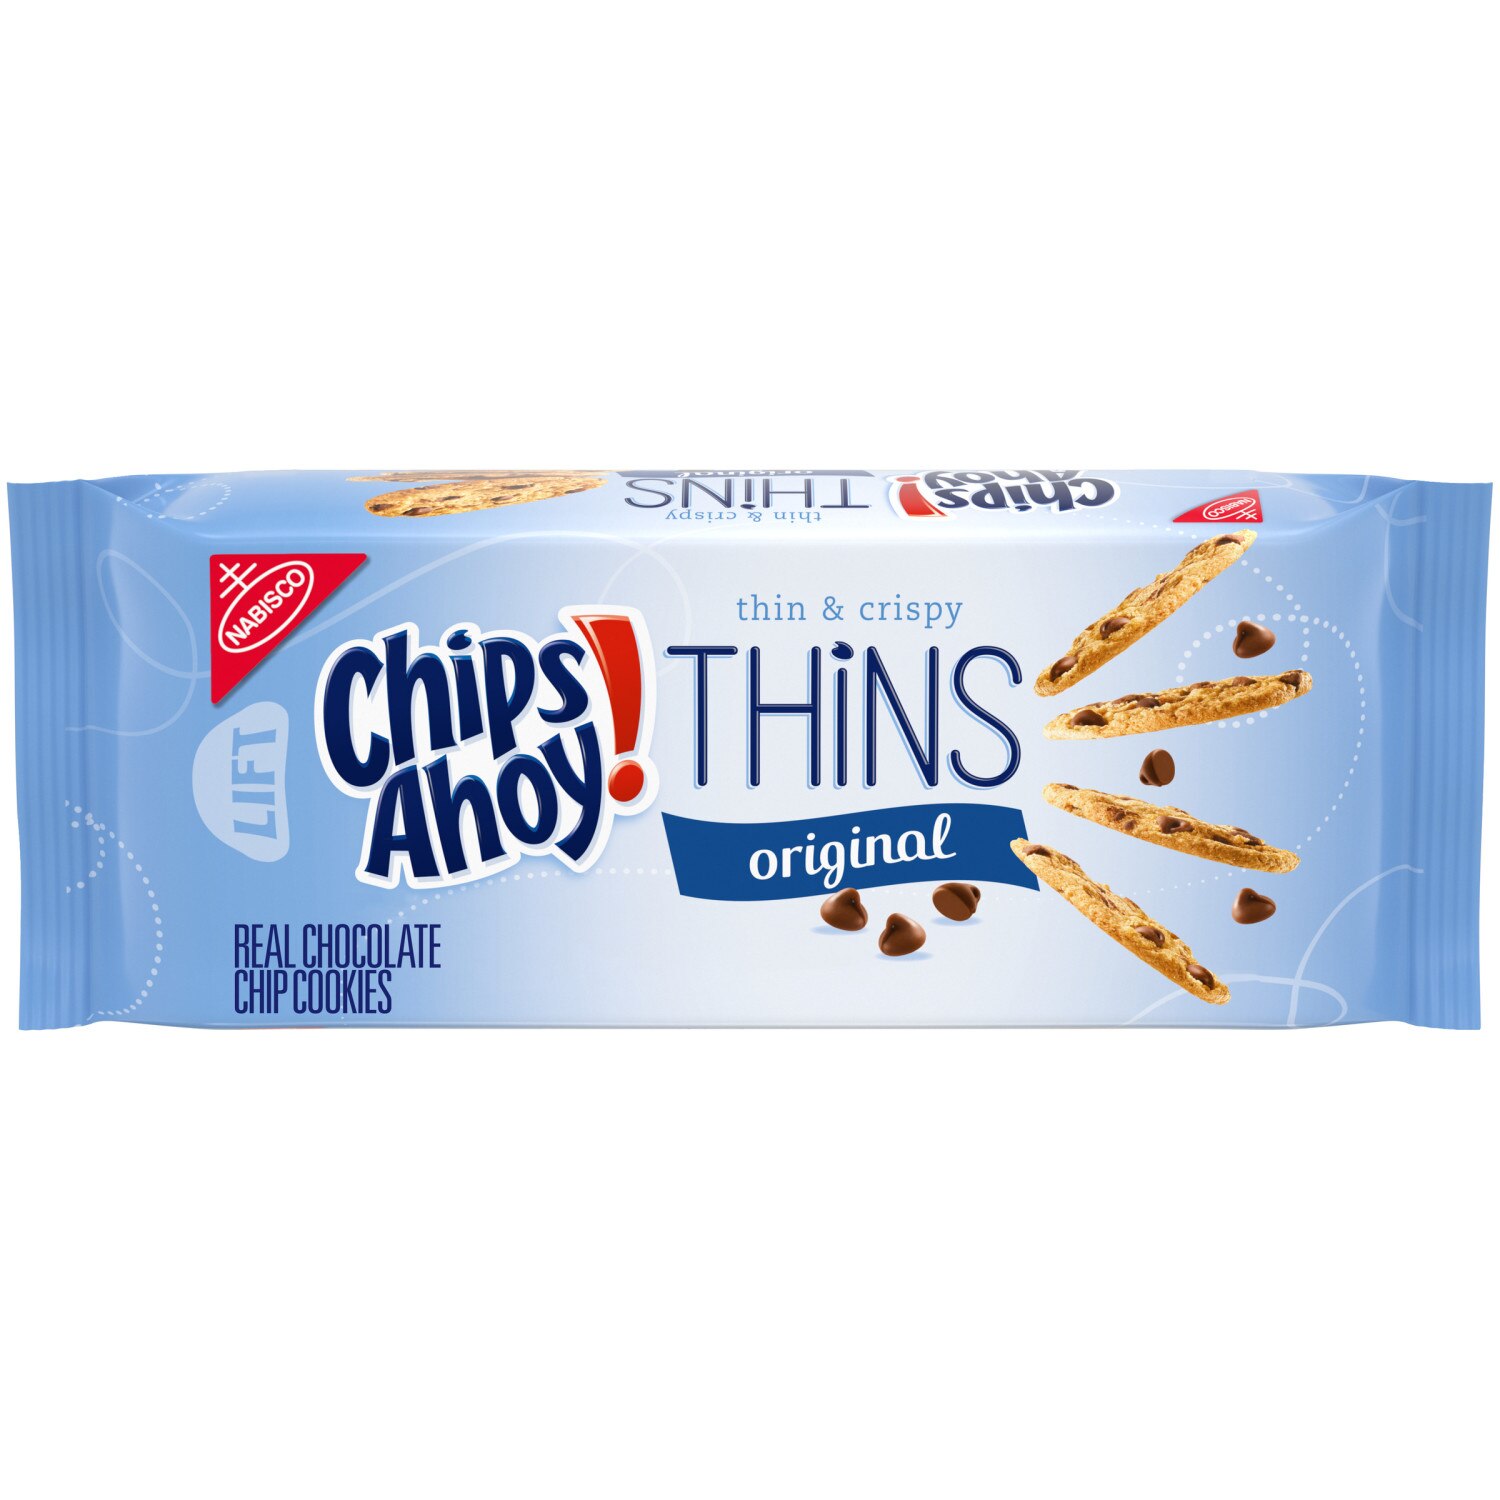 CHIPS AHOY! Thins Original Chocolate Chip Cookies, 7 oz